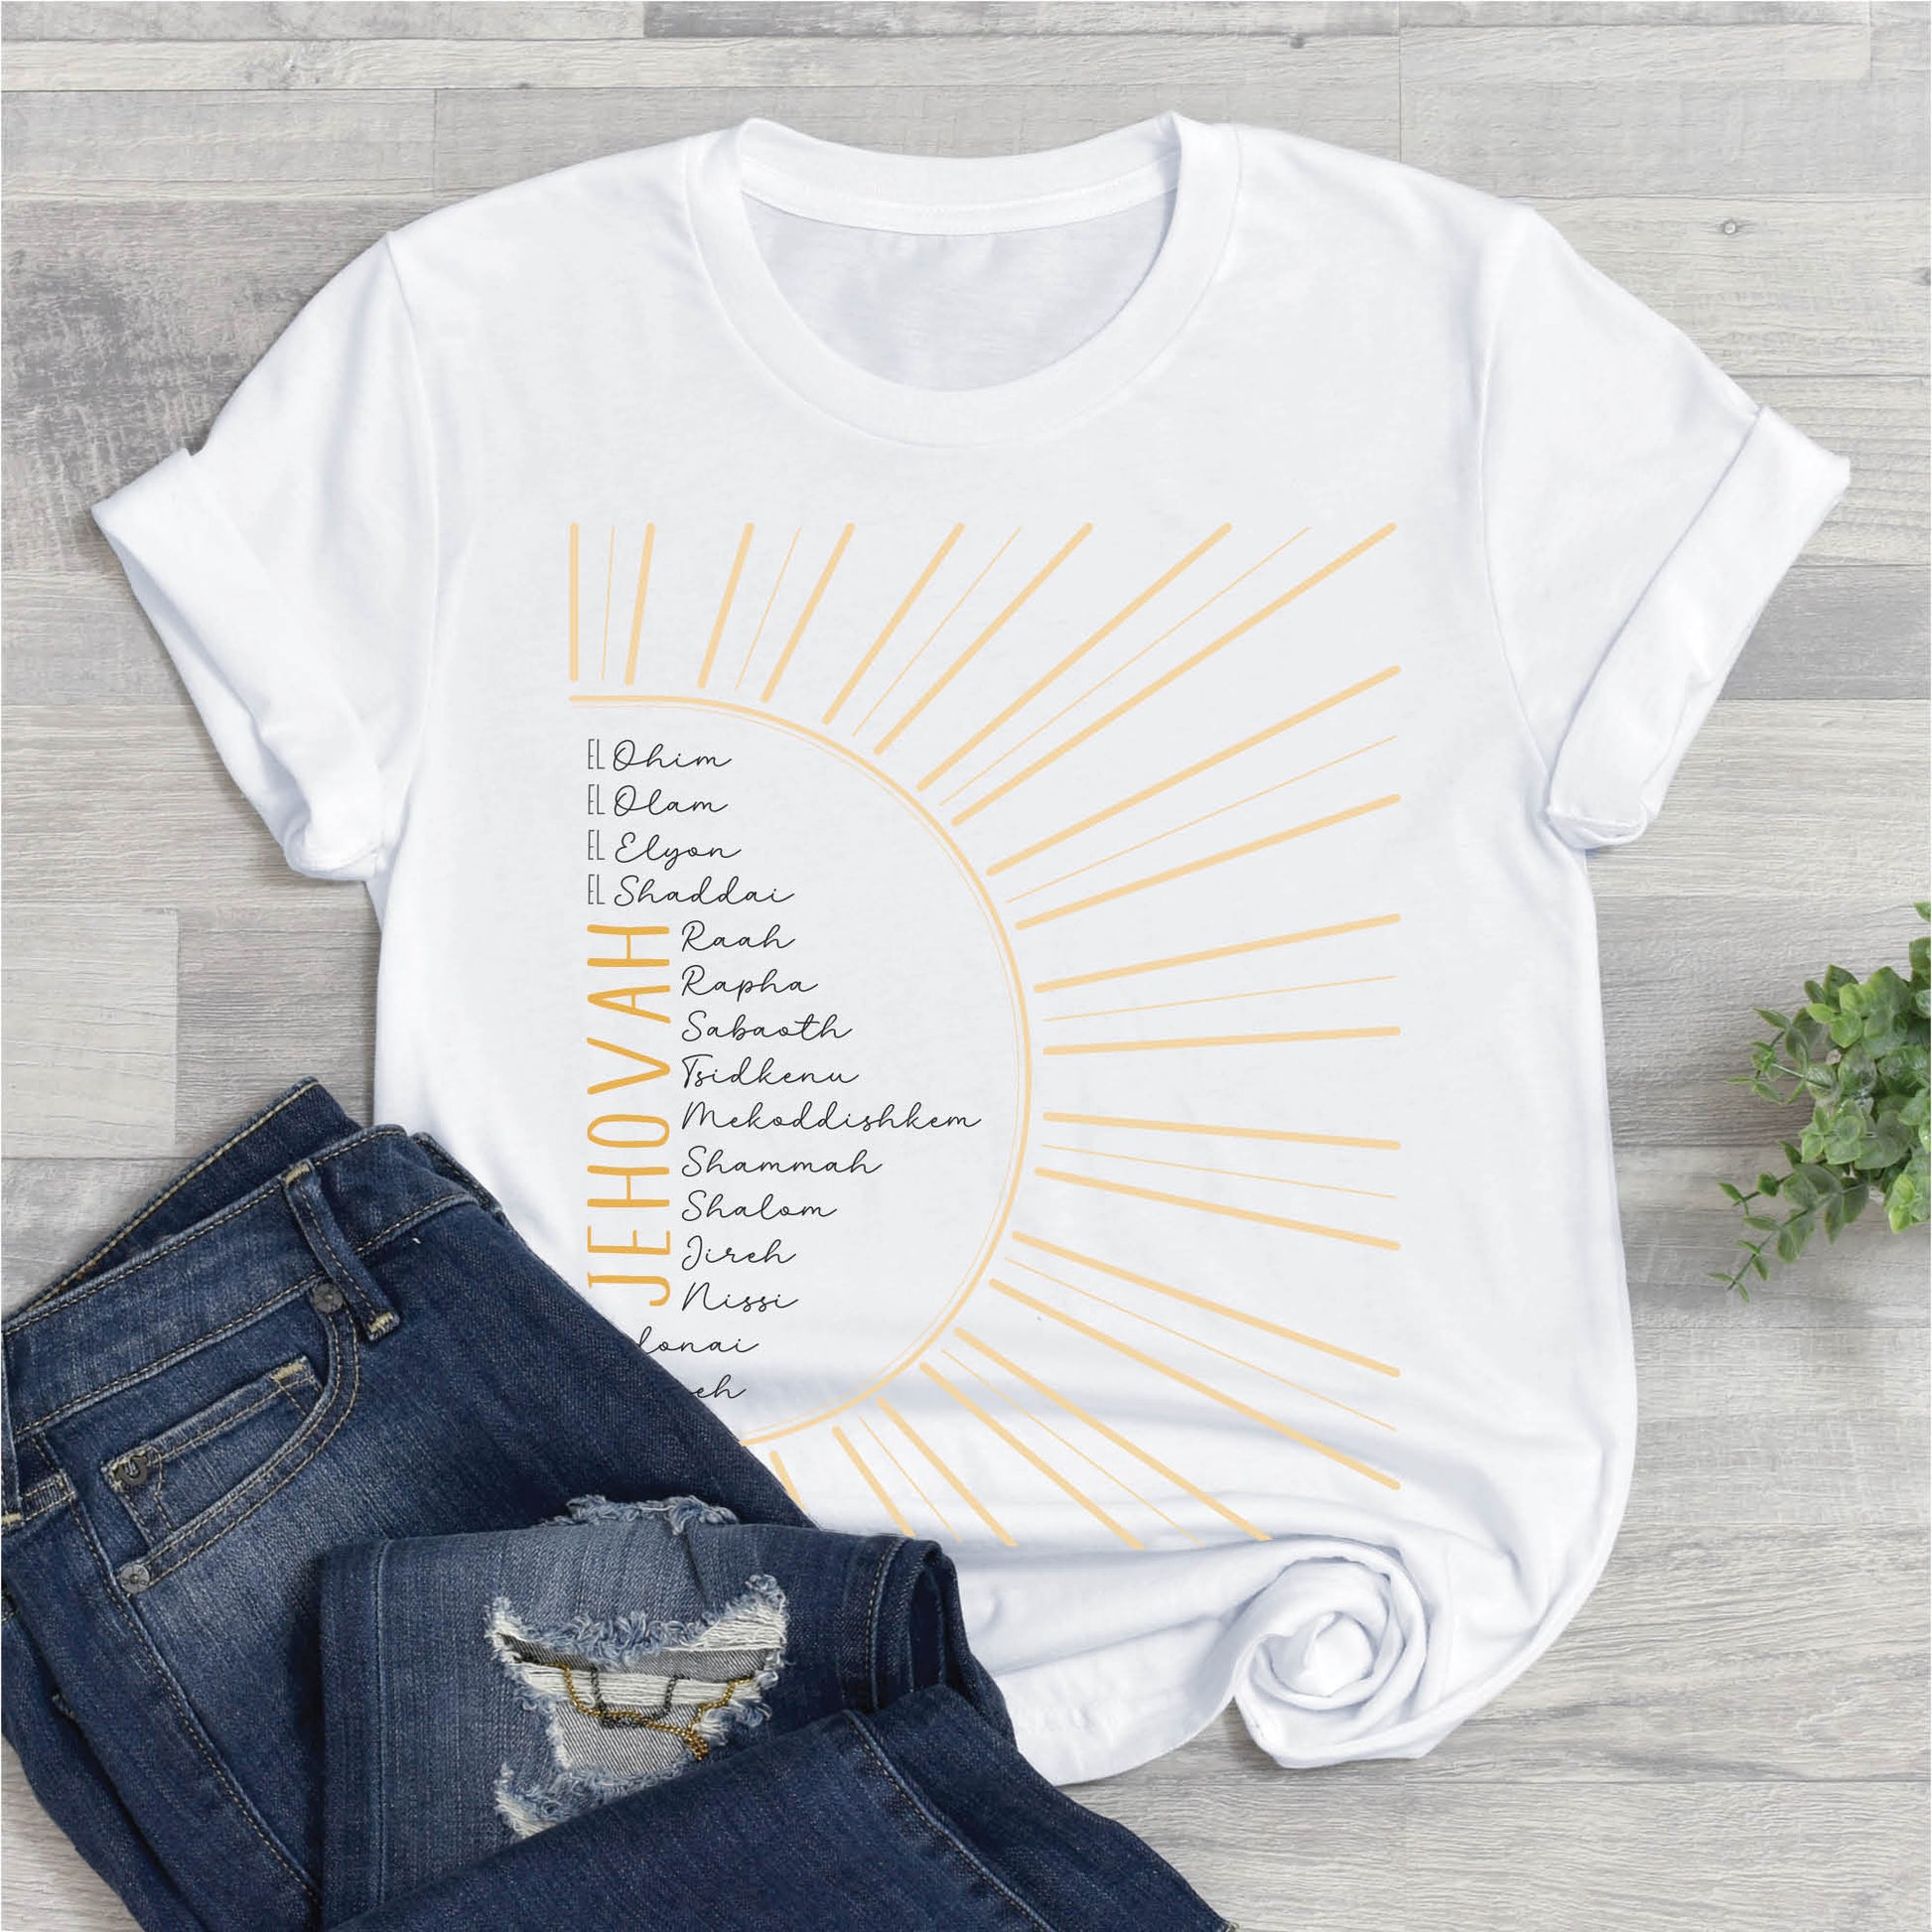 The Names of God Hebrew Christian Old Testament Bible List Sunshine T-Shirt, printed in gold and white on White Bella-Canvas 3001 t-shirt, women's soft unisex fit regular and plus size tee